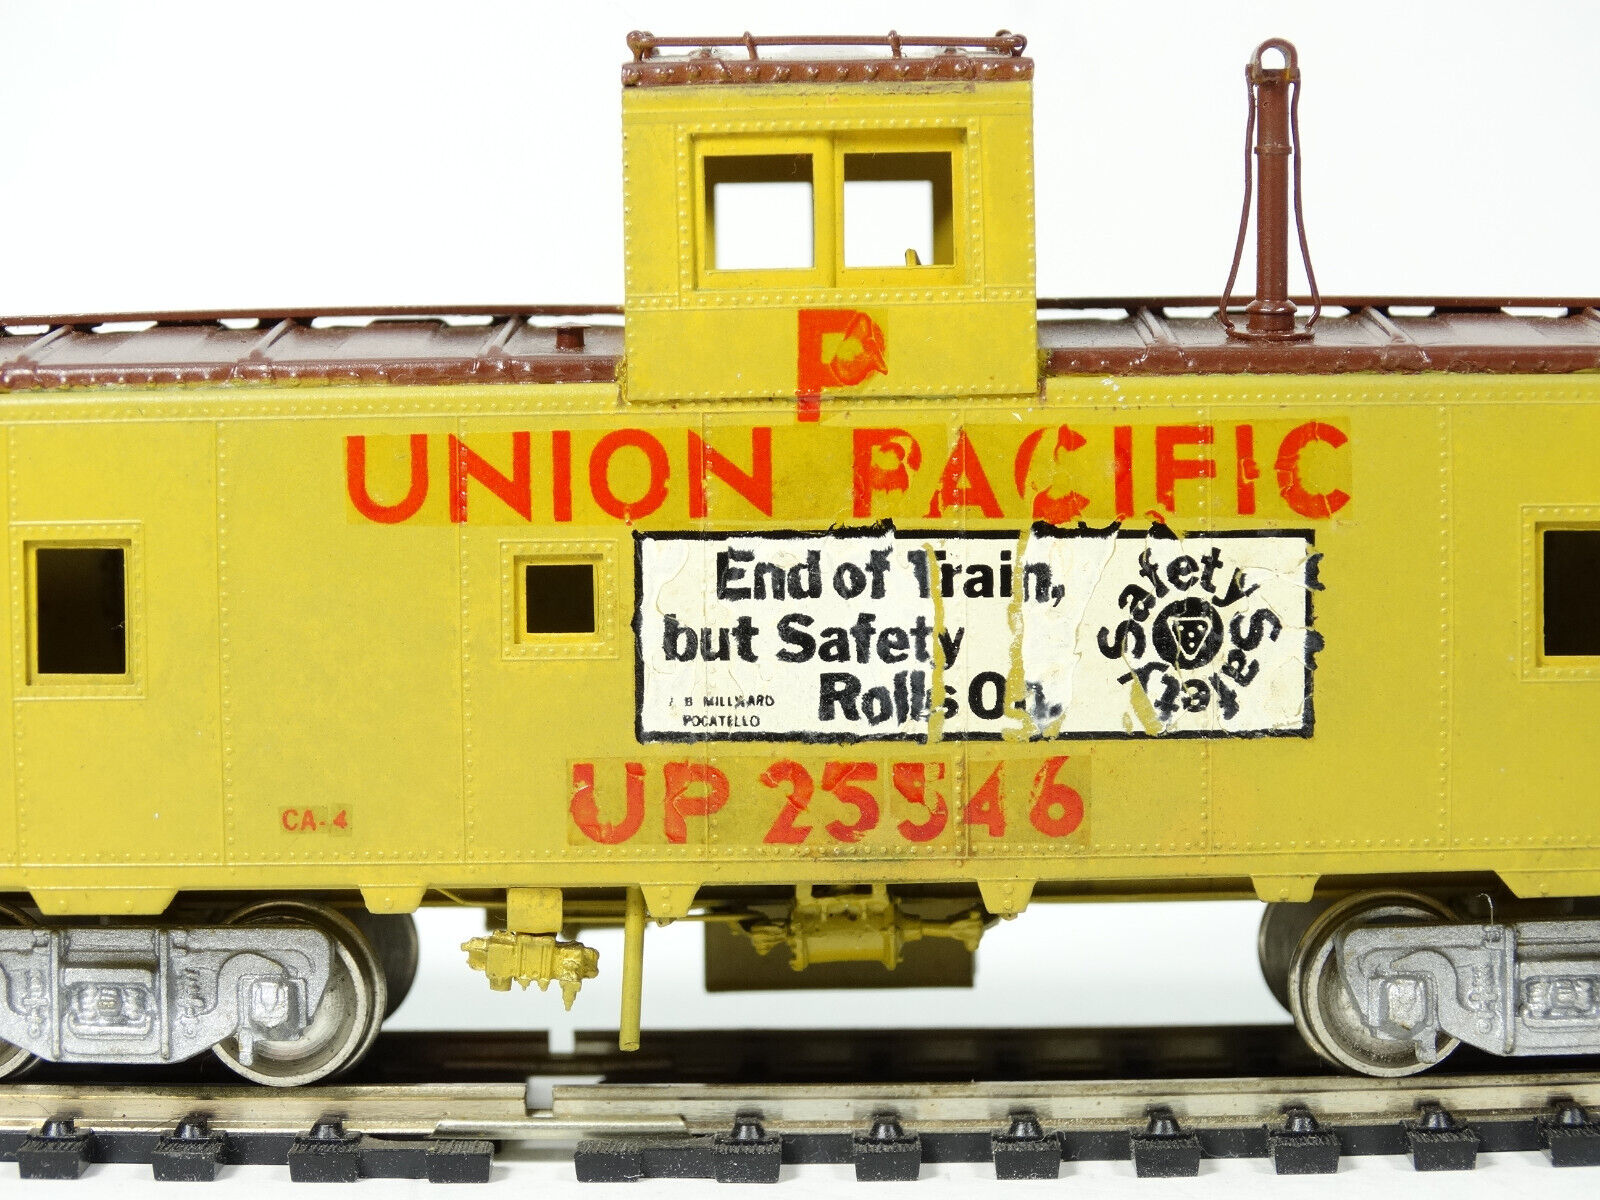 Overland Models, Union Pacific CA-4, Caboose OMI-1121 Painted, HO Scale